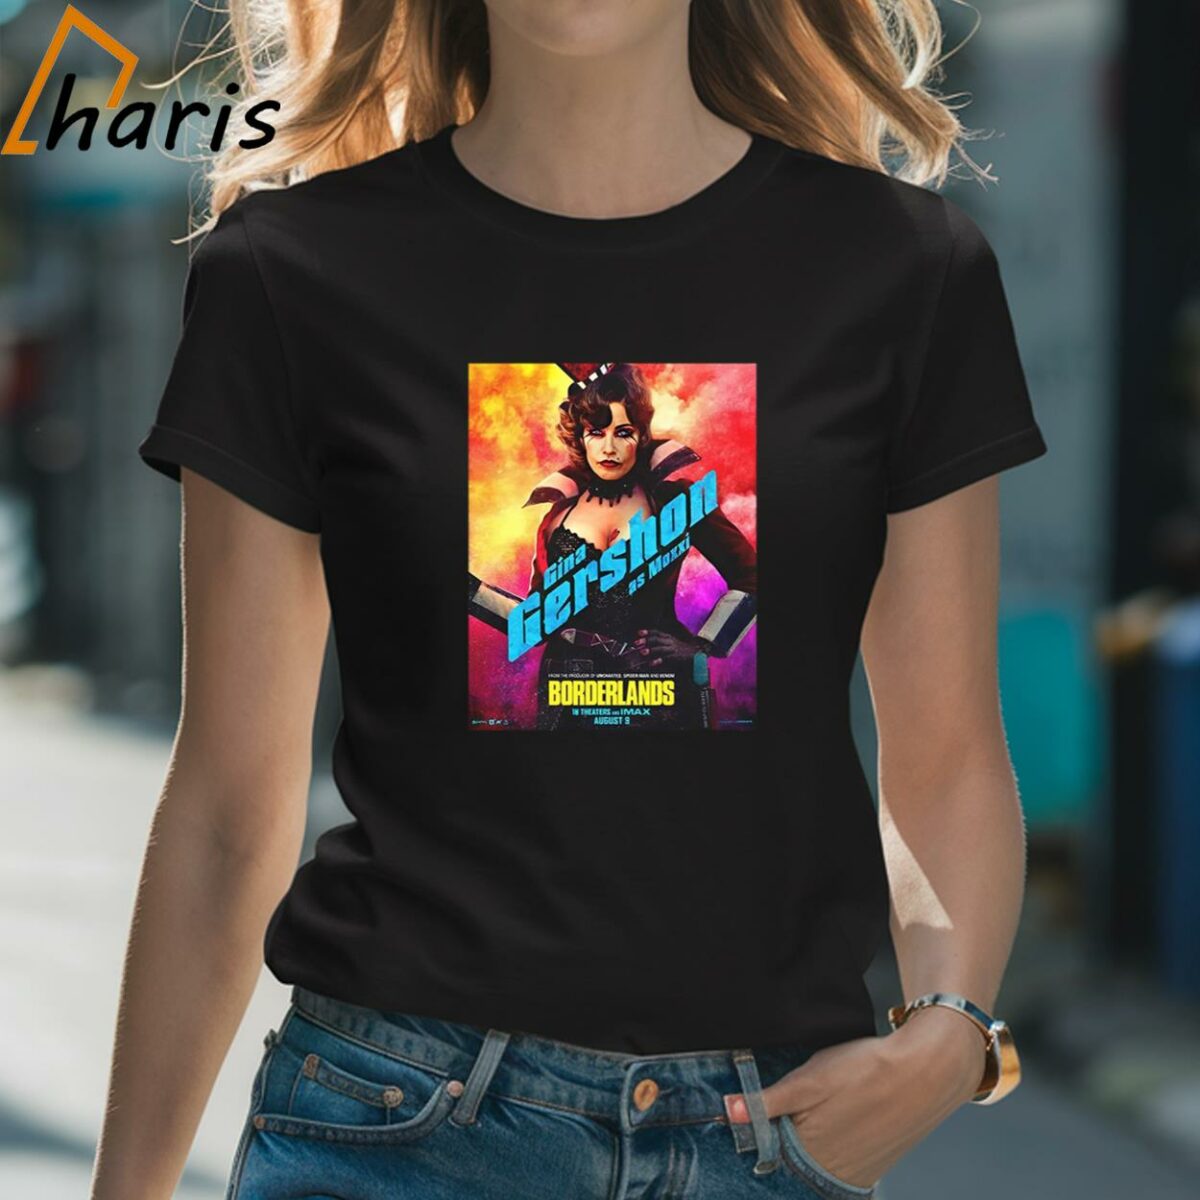 New Character Moxxi Posters For Borderlands Releasing In Theaters And IMAX On August 9 Unisex T Shirt 2 Shirt